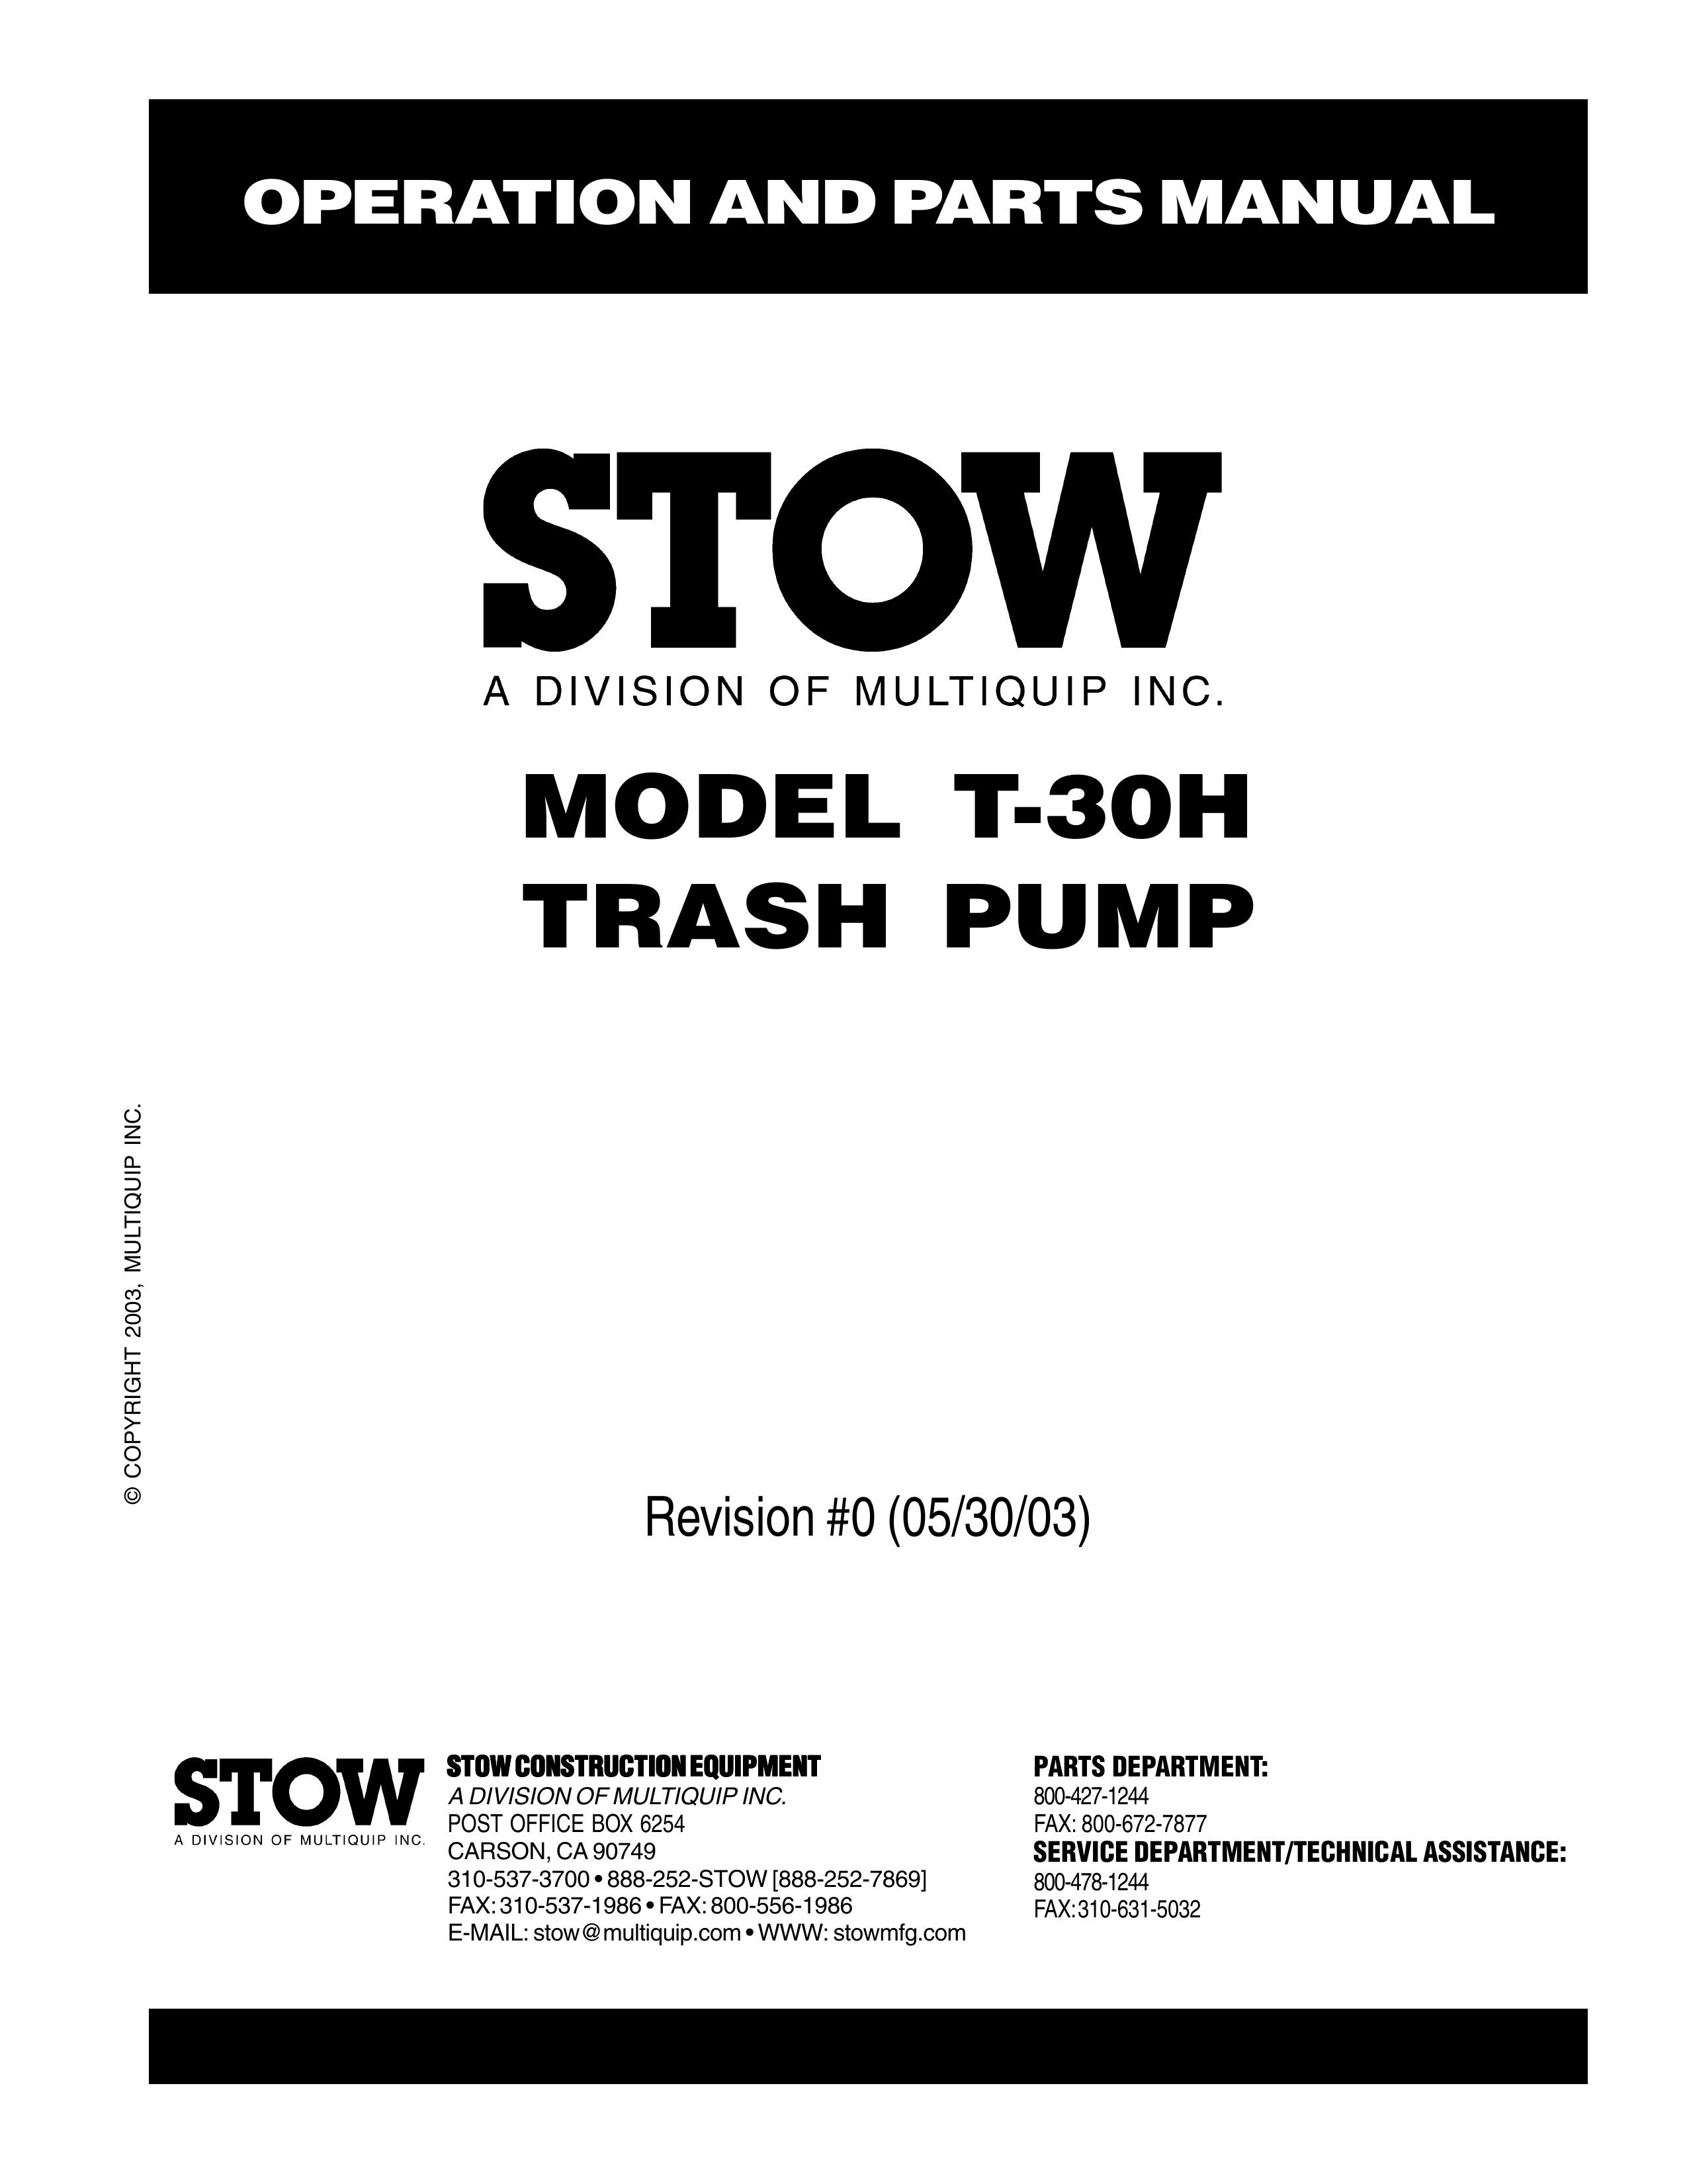 Stow T-30H Trash Compactor User Manual